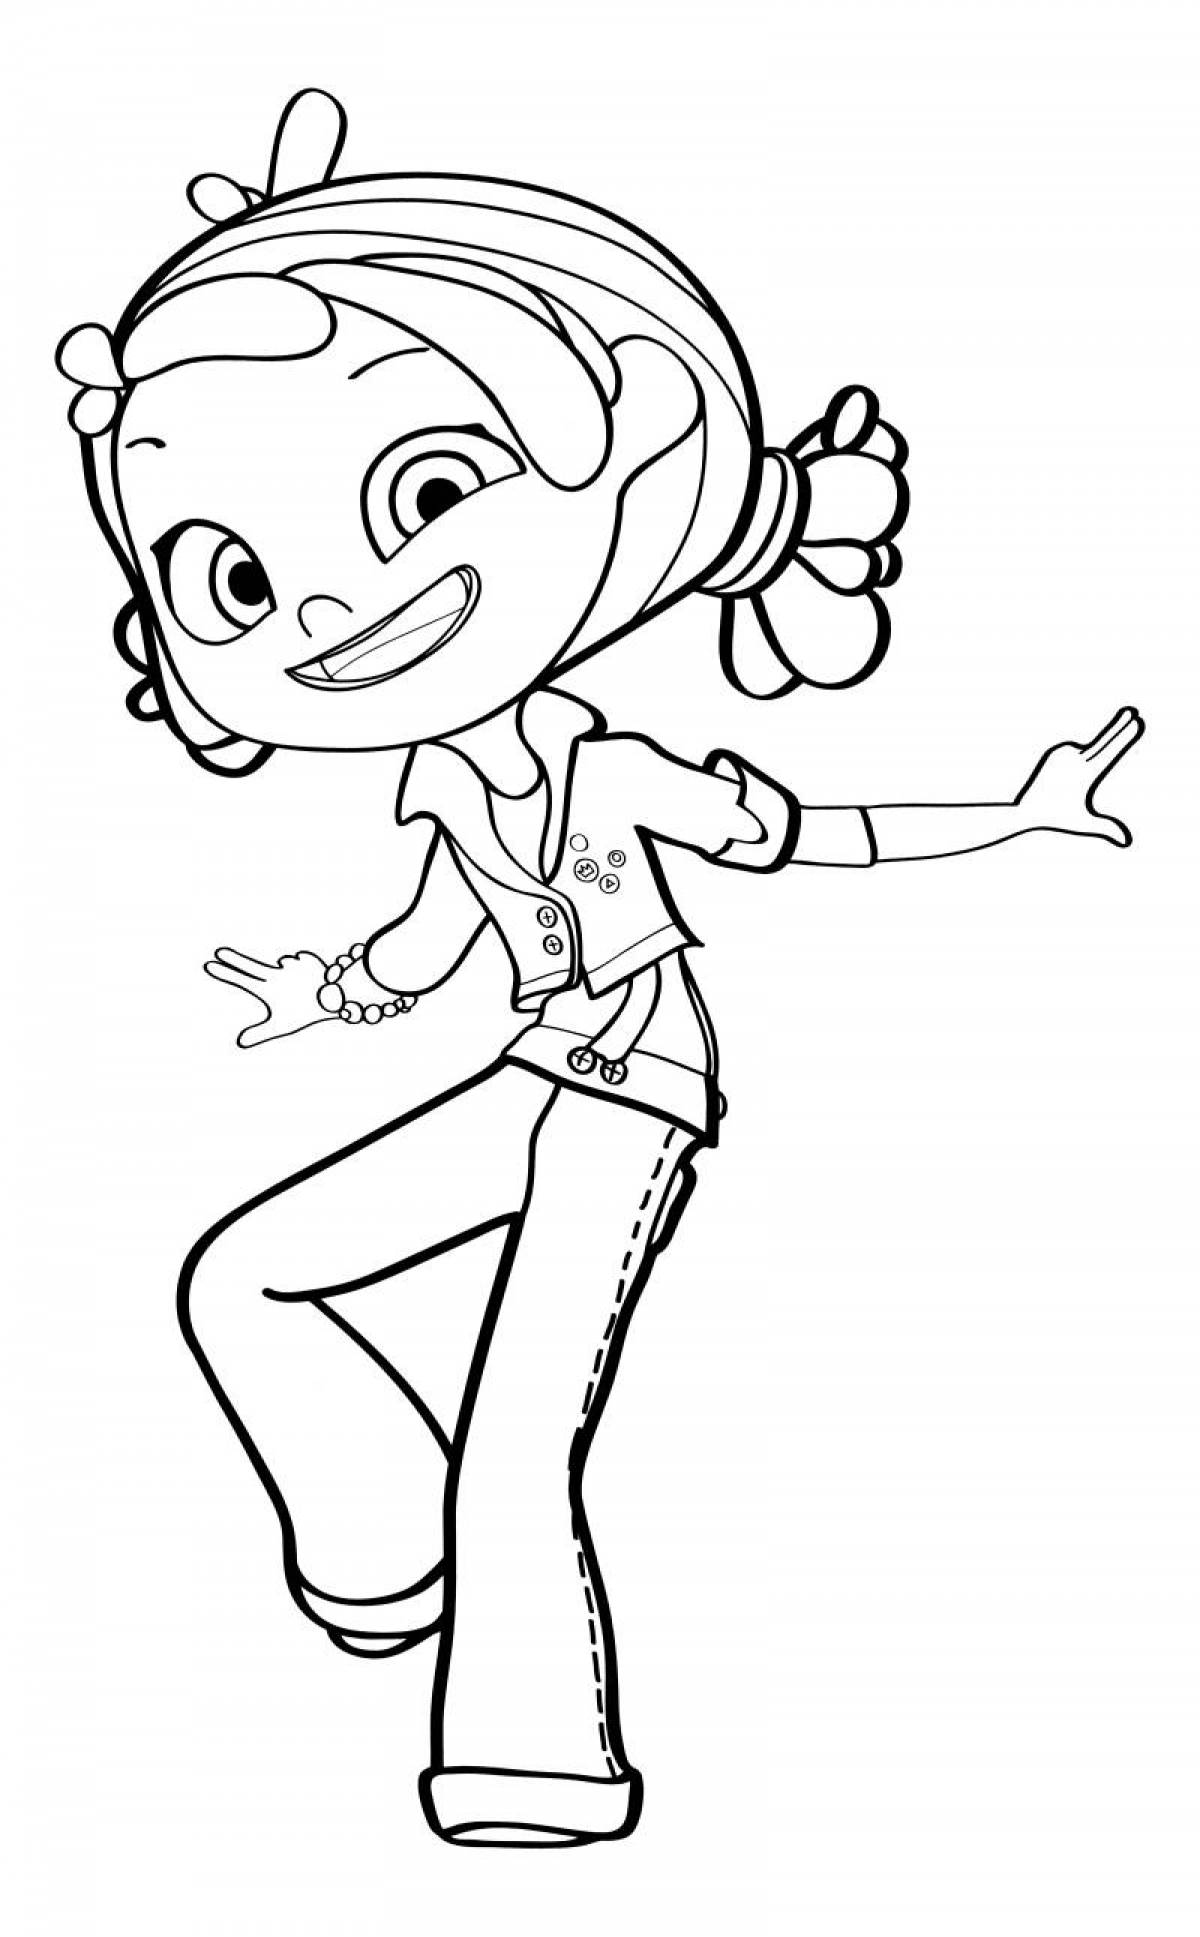 Adorable snowball coloring page